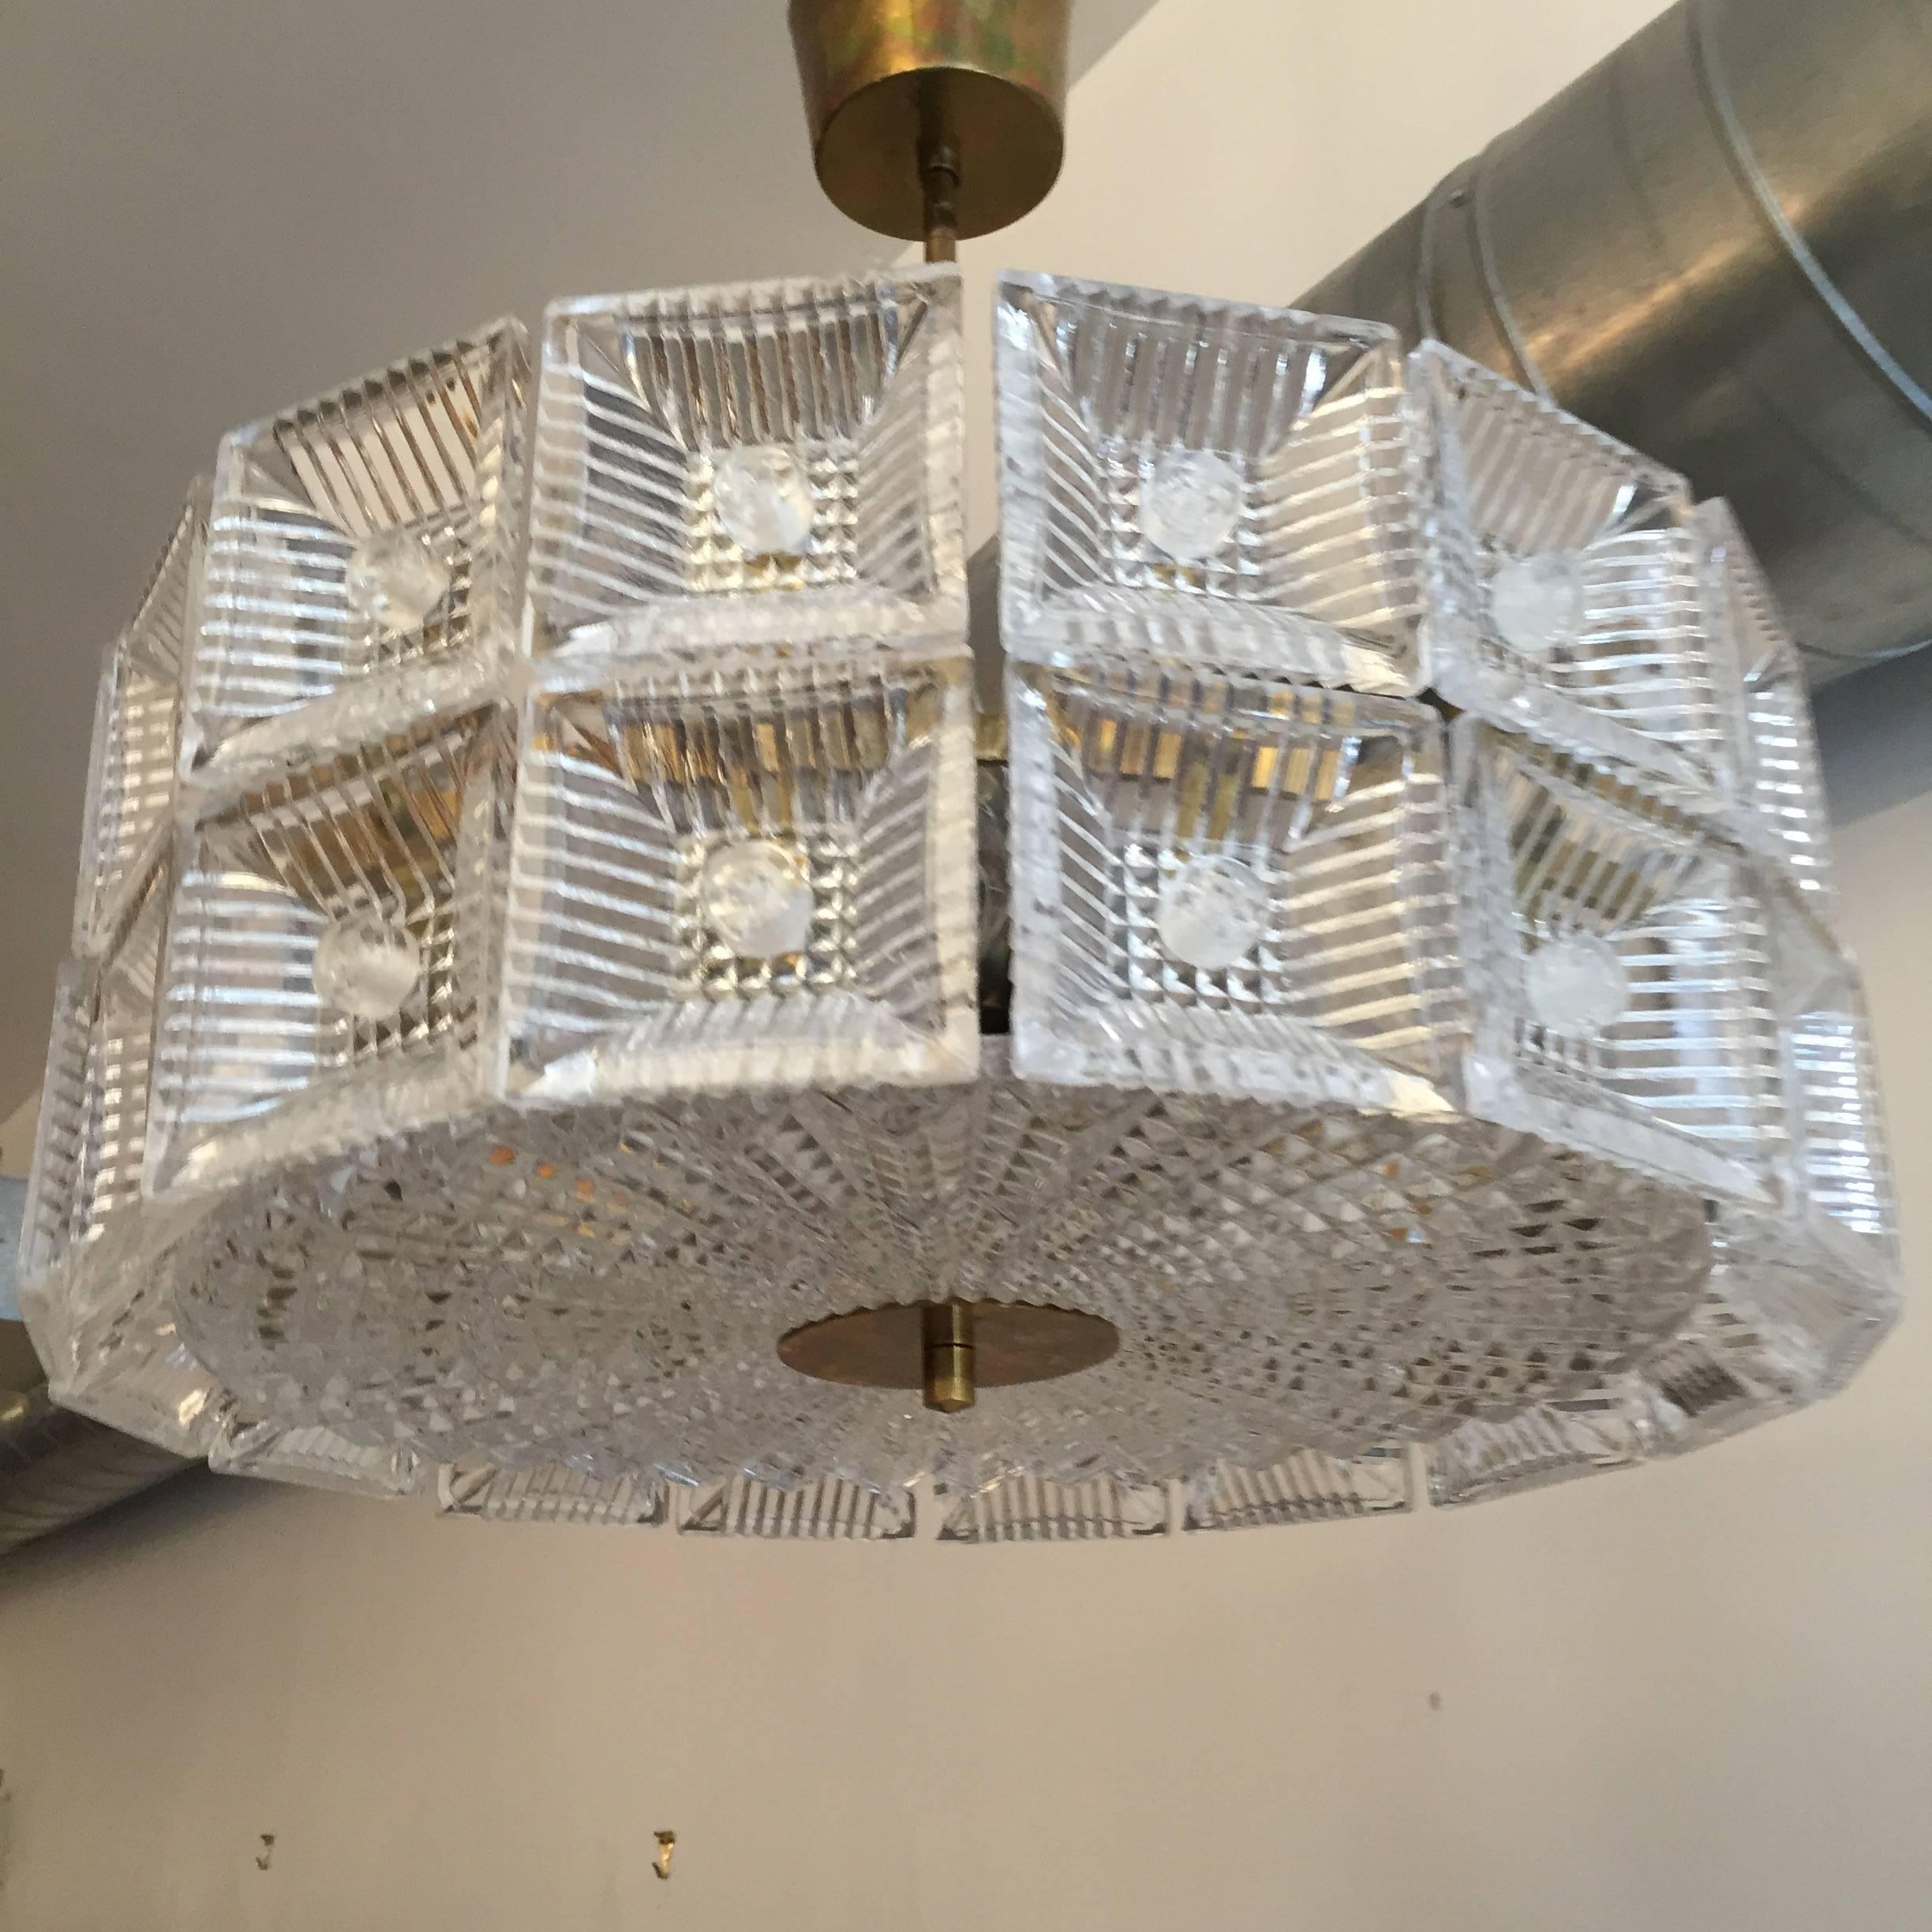 A wonderful original 1960s Swedish crystal hanging pendant or flush ceiling light designed by Carl Fagerlund for Orrefors. The light is composed of two rows of thick cut crystal square elements and one large circular crystal diffuser and polished